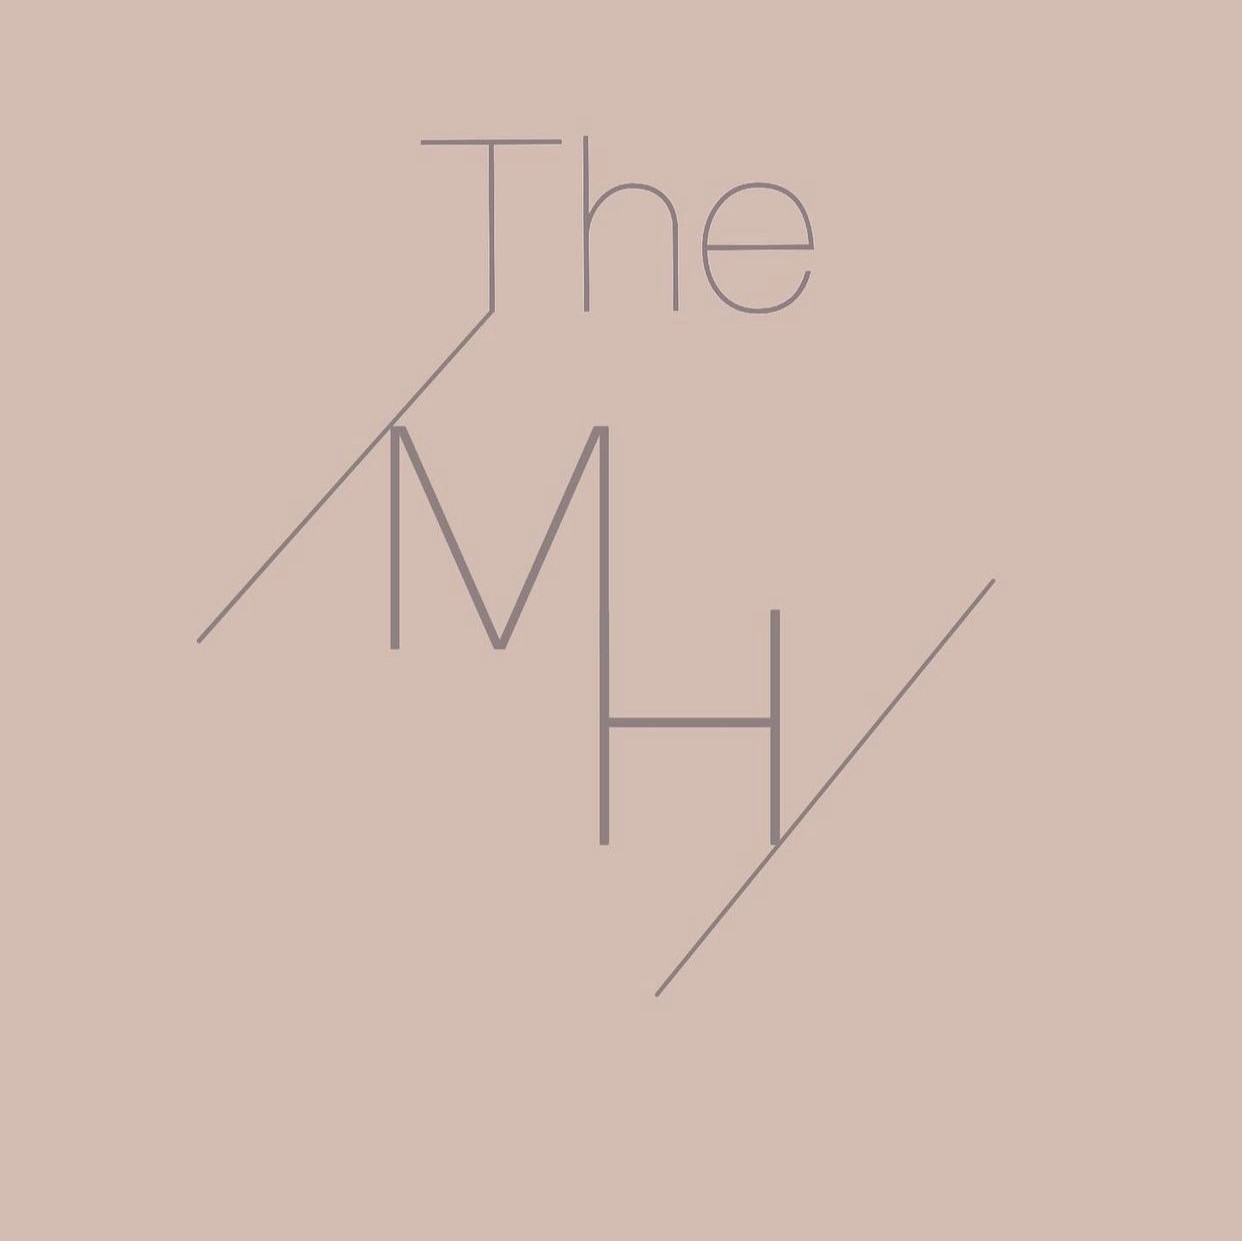 The MH